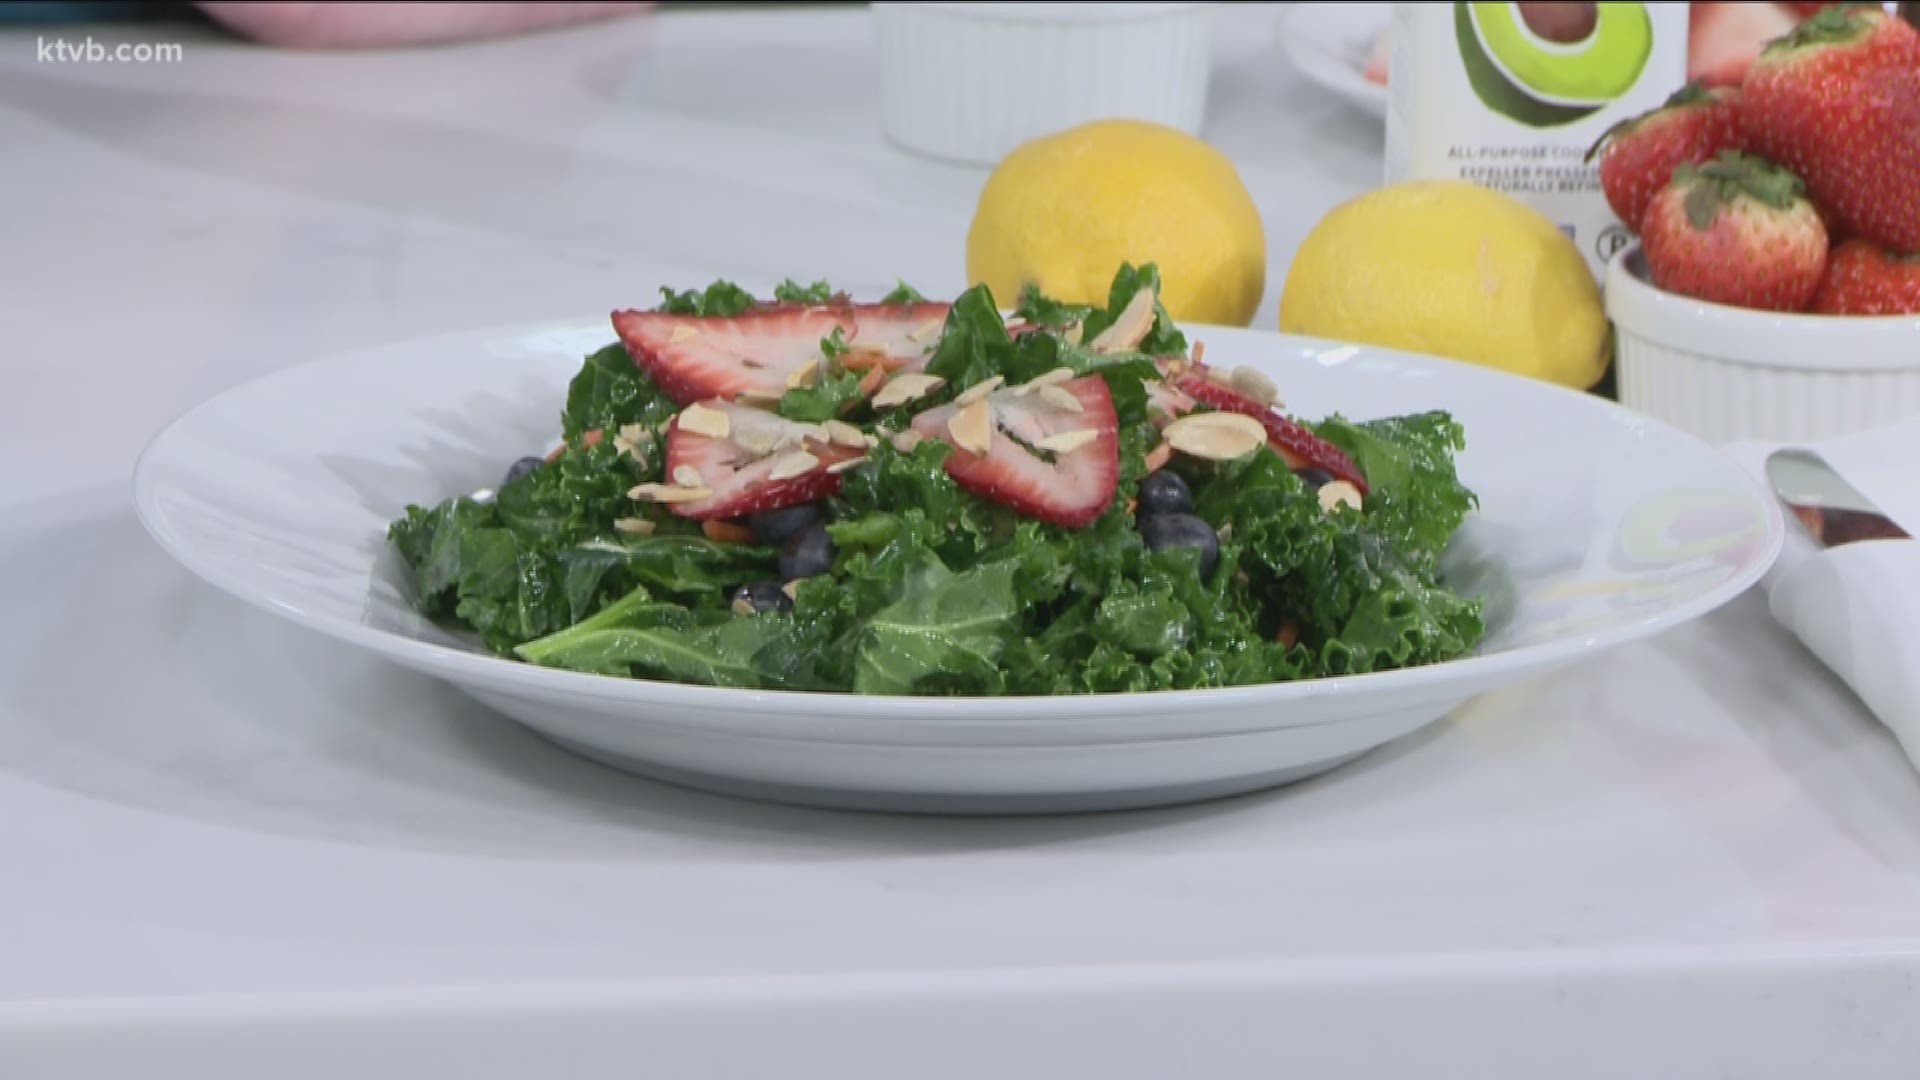 Chef Christina Murray is back with us in the KTVB kitchen to show us how to make a detox salad!